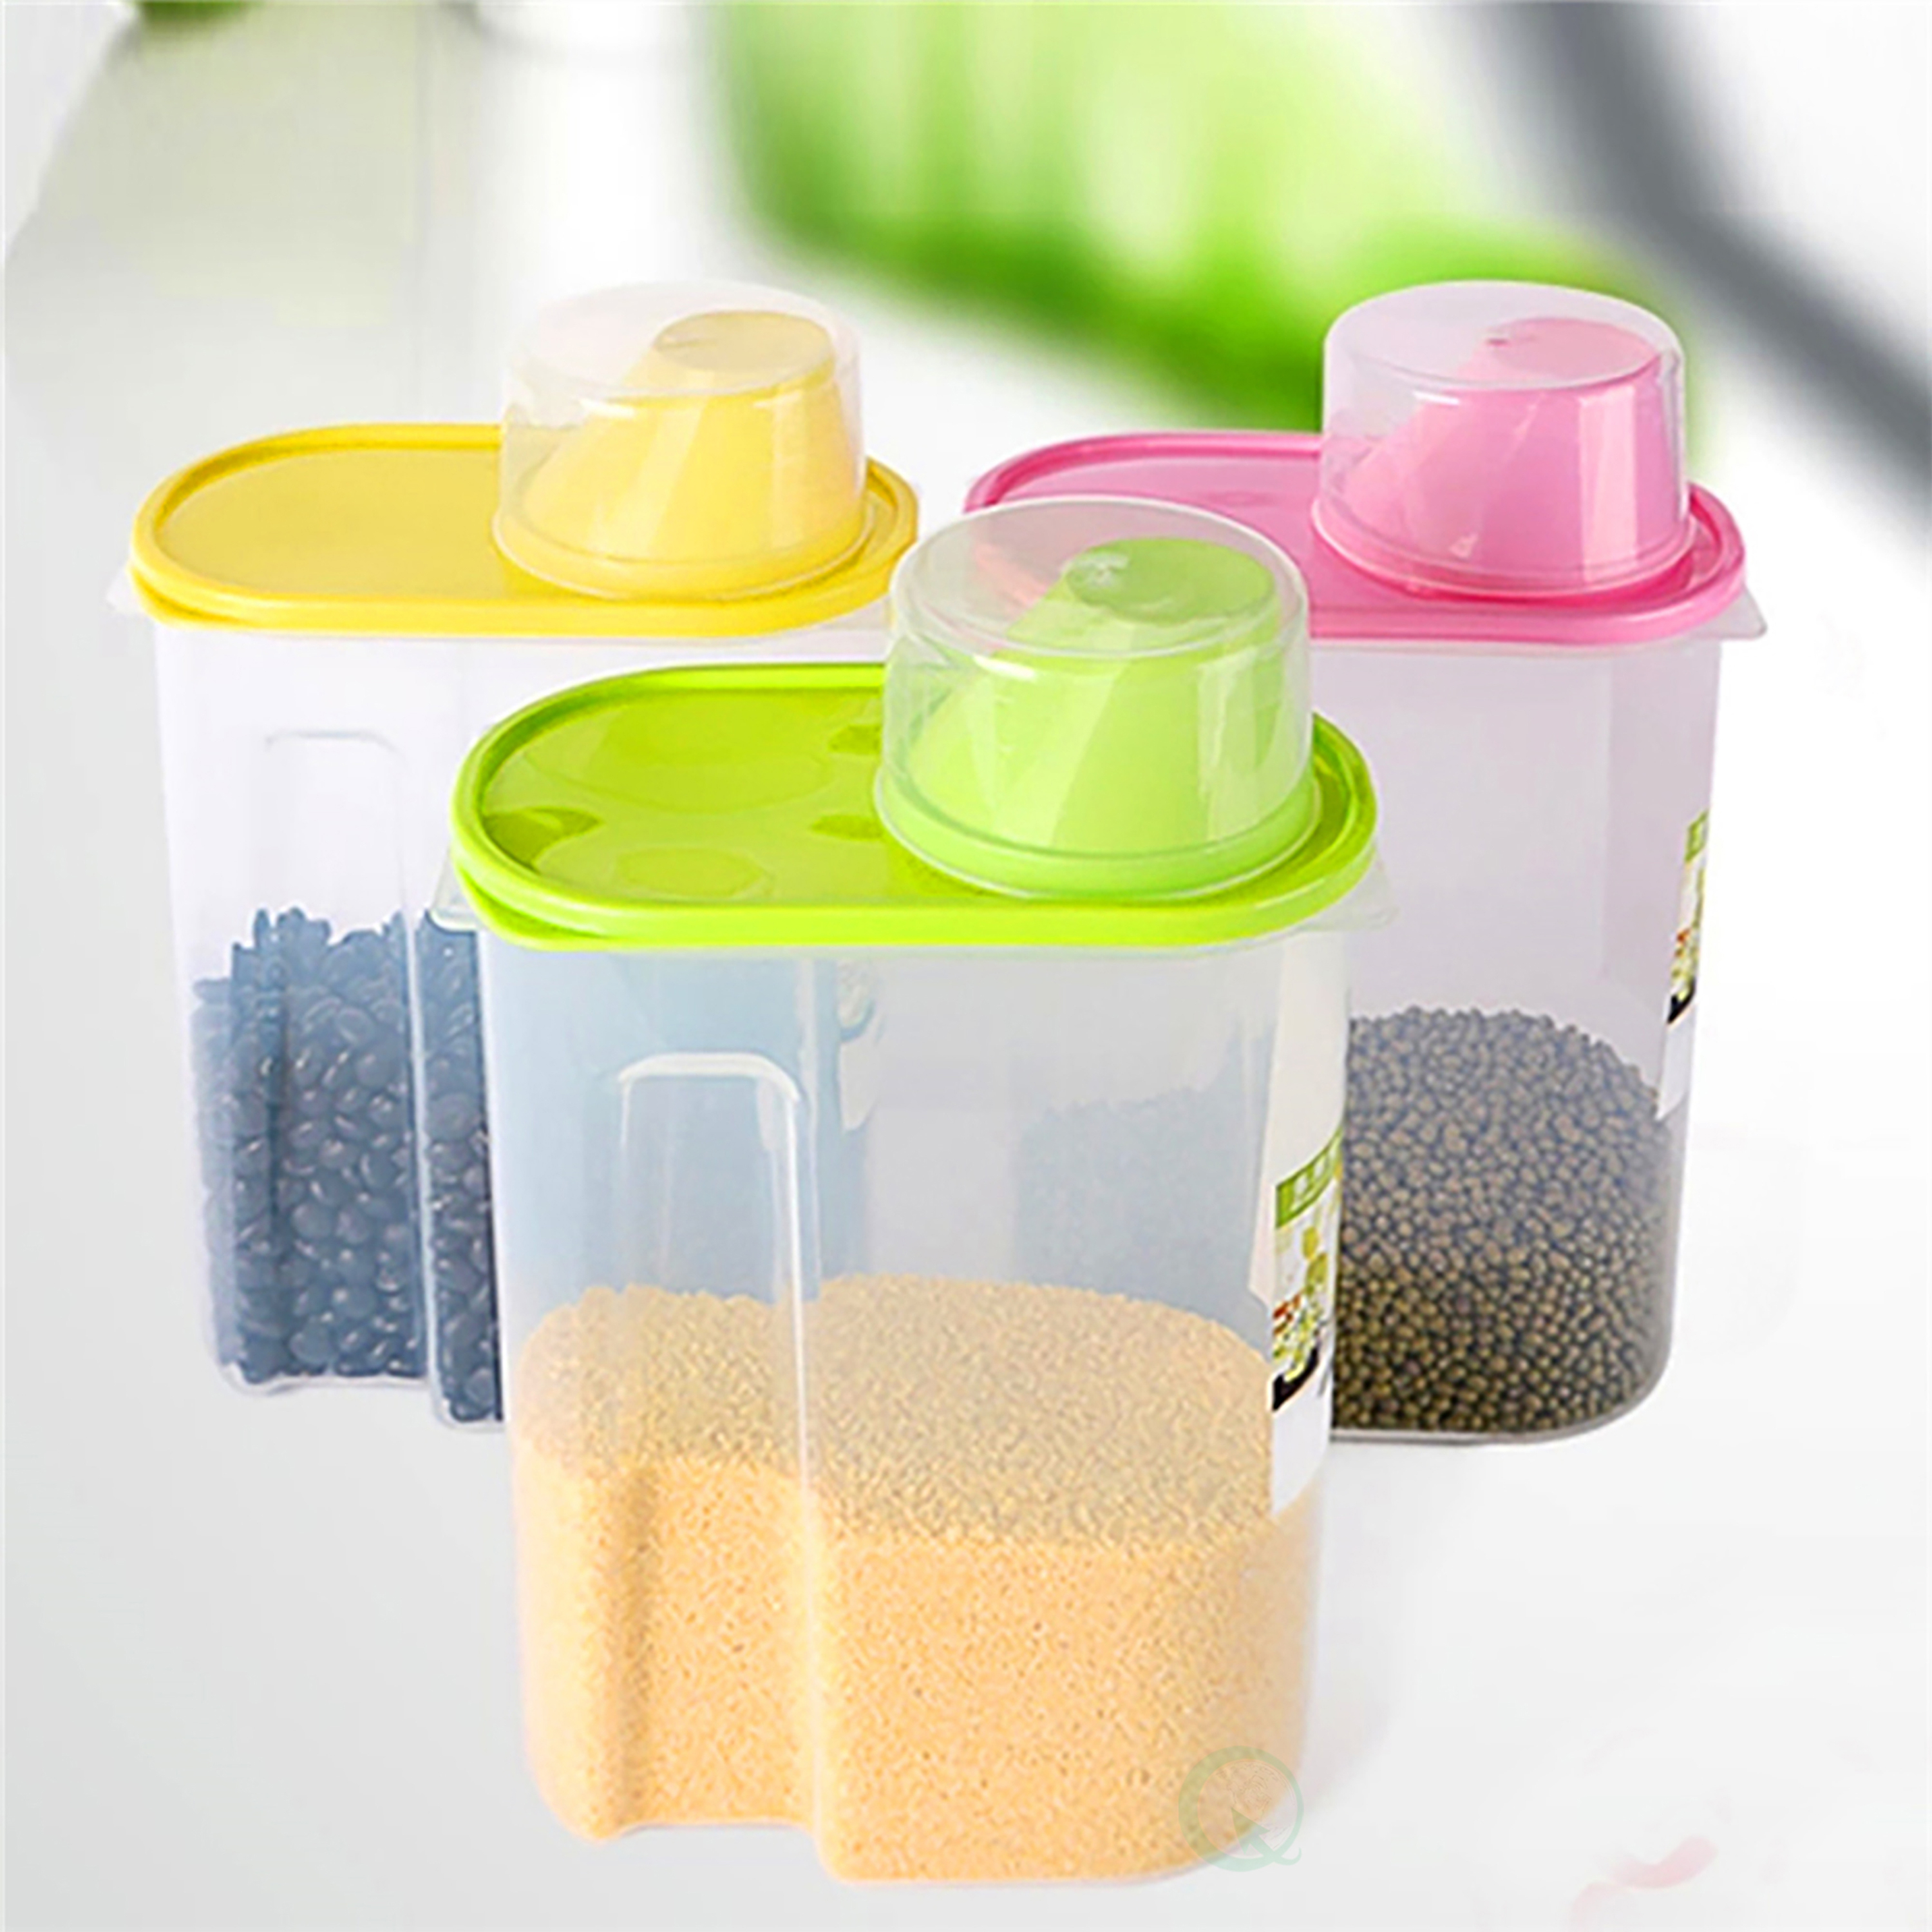 BPA-Free Plastic Food Saver-Kitchen Food Cereal Storage Containers With Graduated Cap - Set Of 3 Small